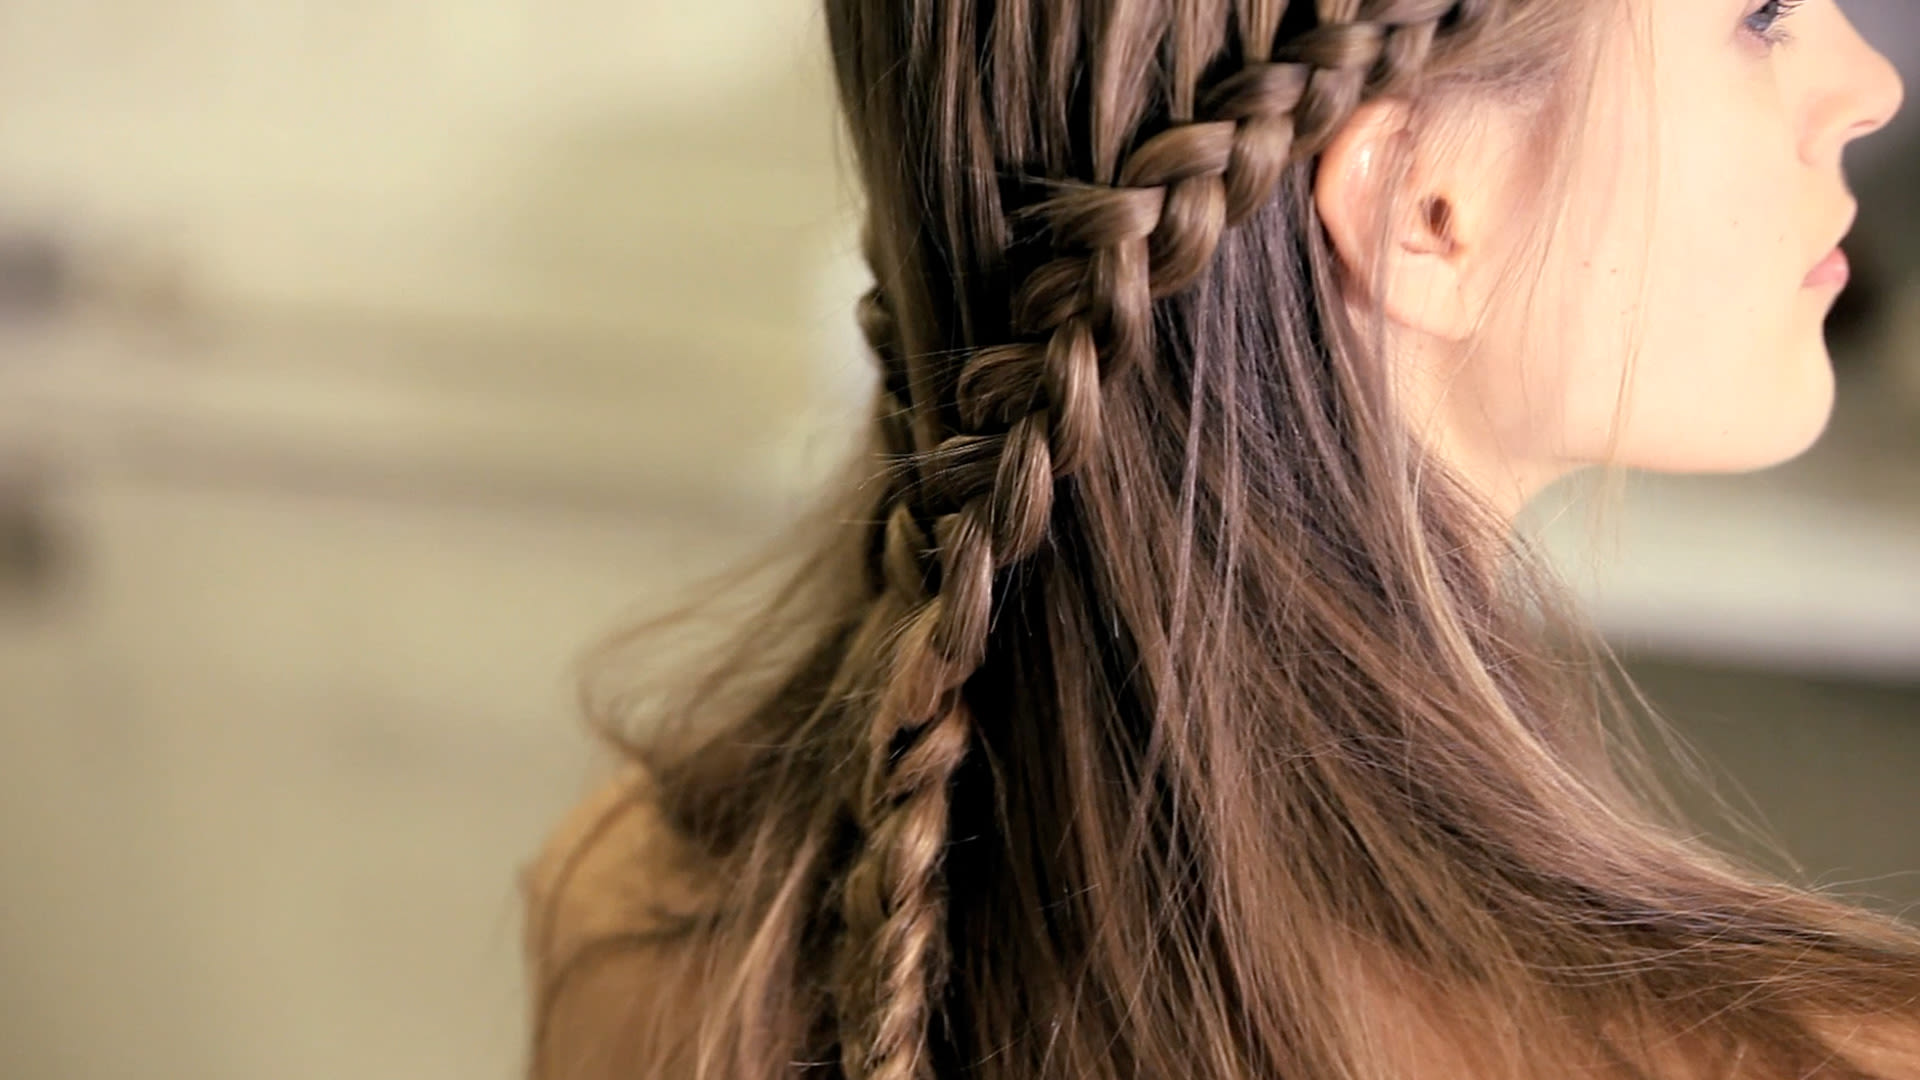 Watch The Double Braid | The Monday Makeover | Vogue